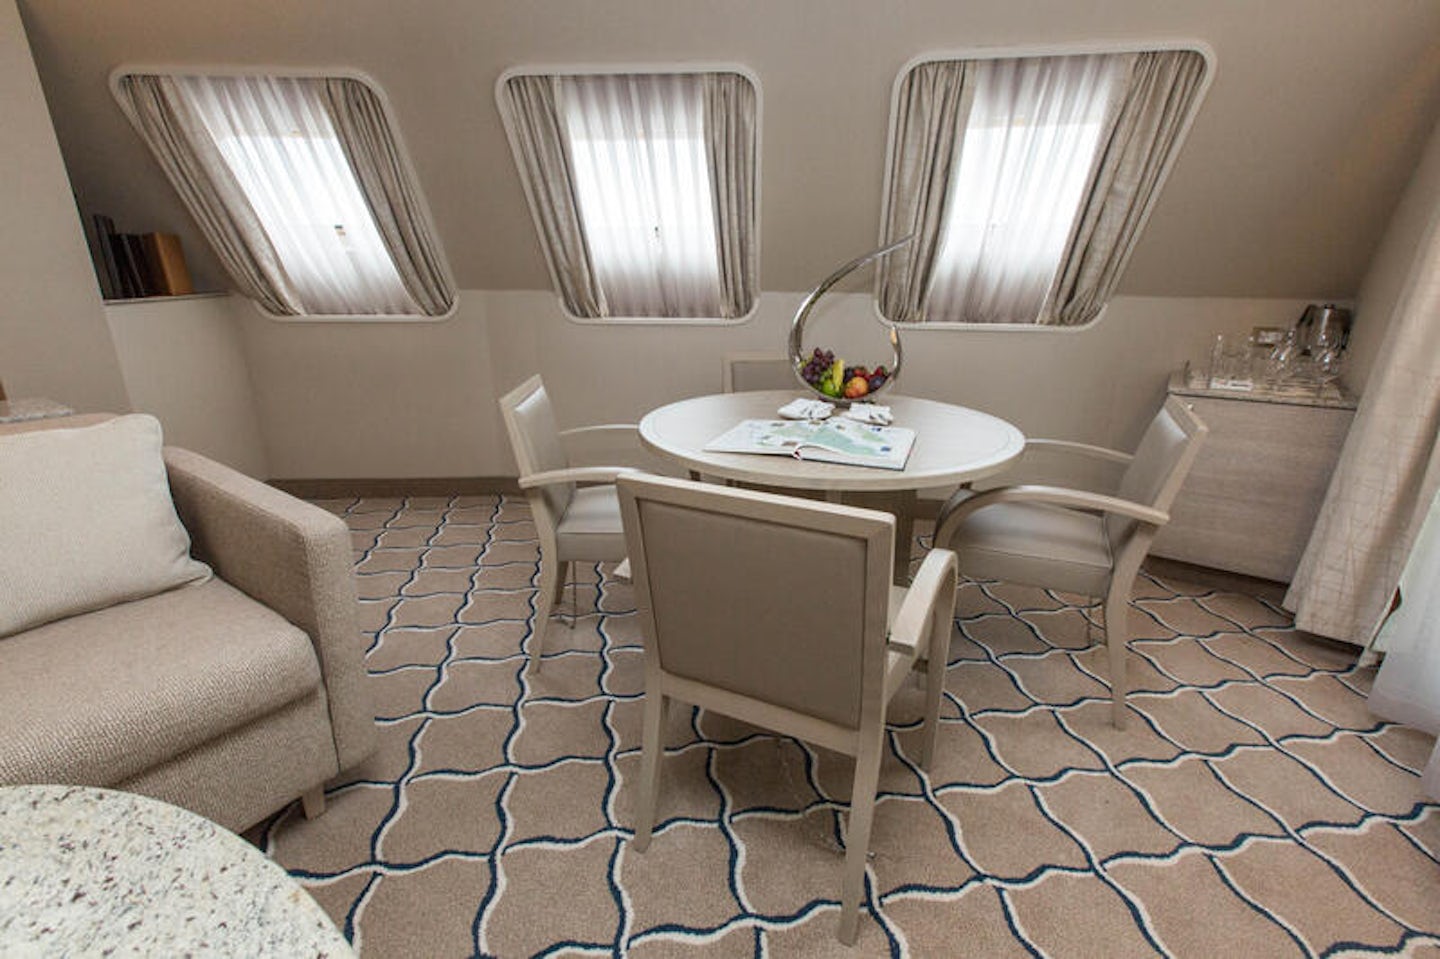 The Royal Suite on Silver Cloud Expedition